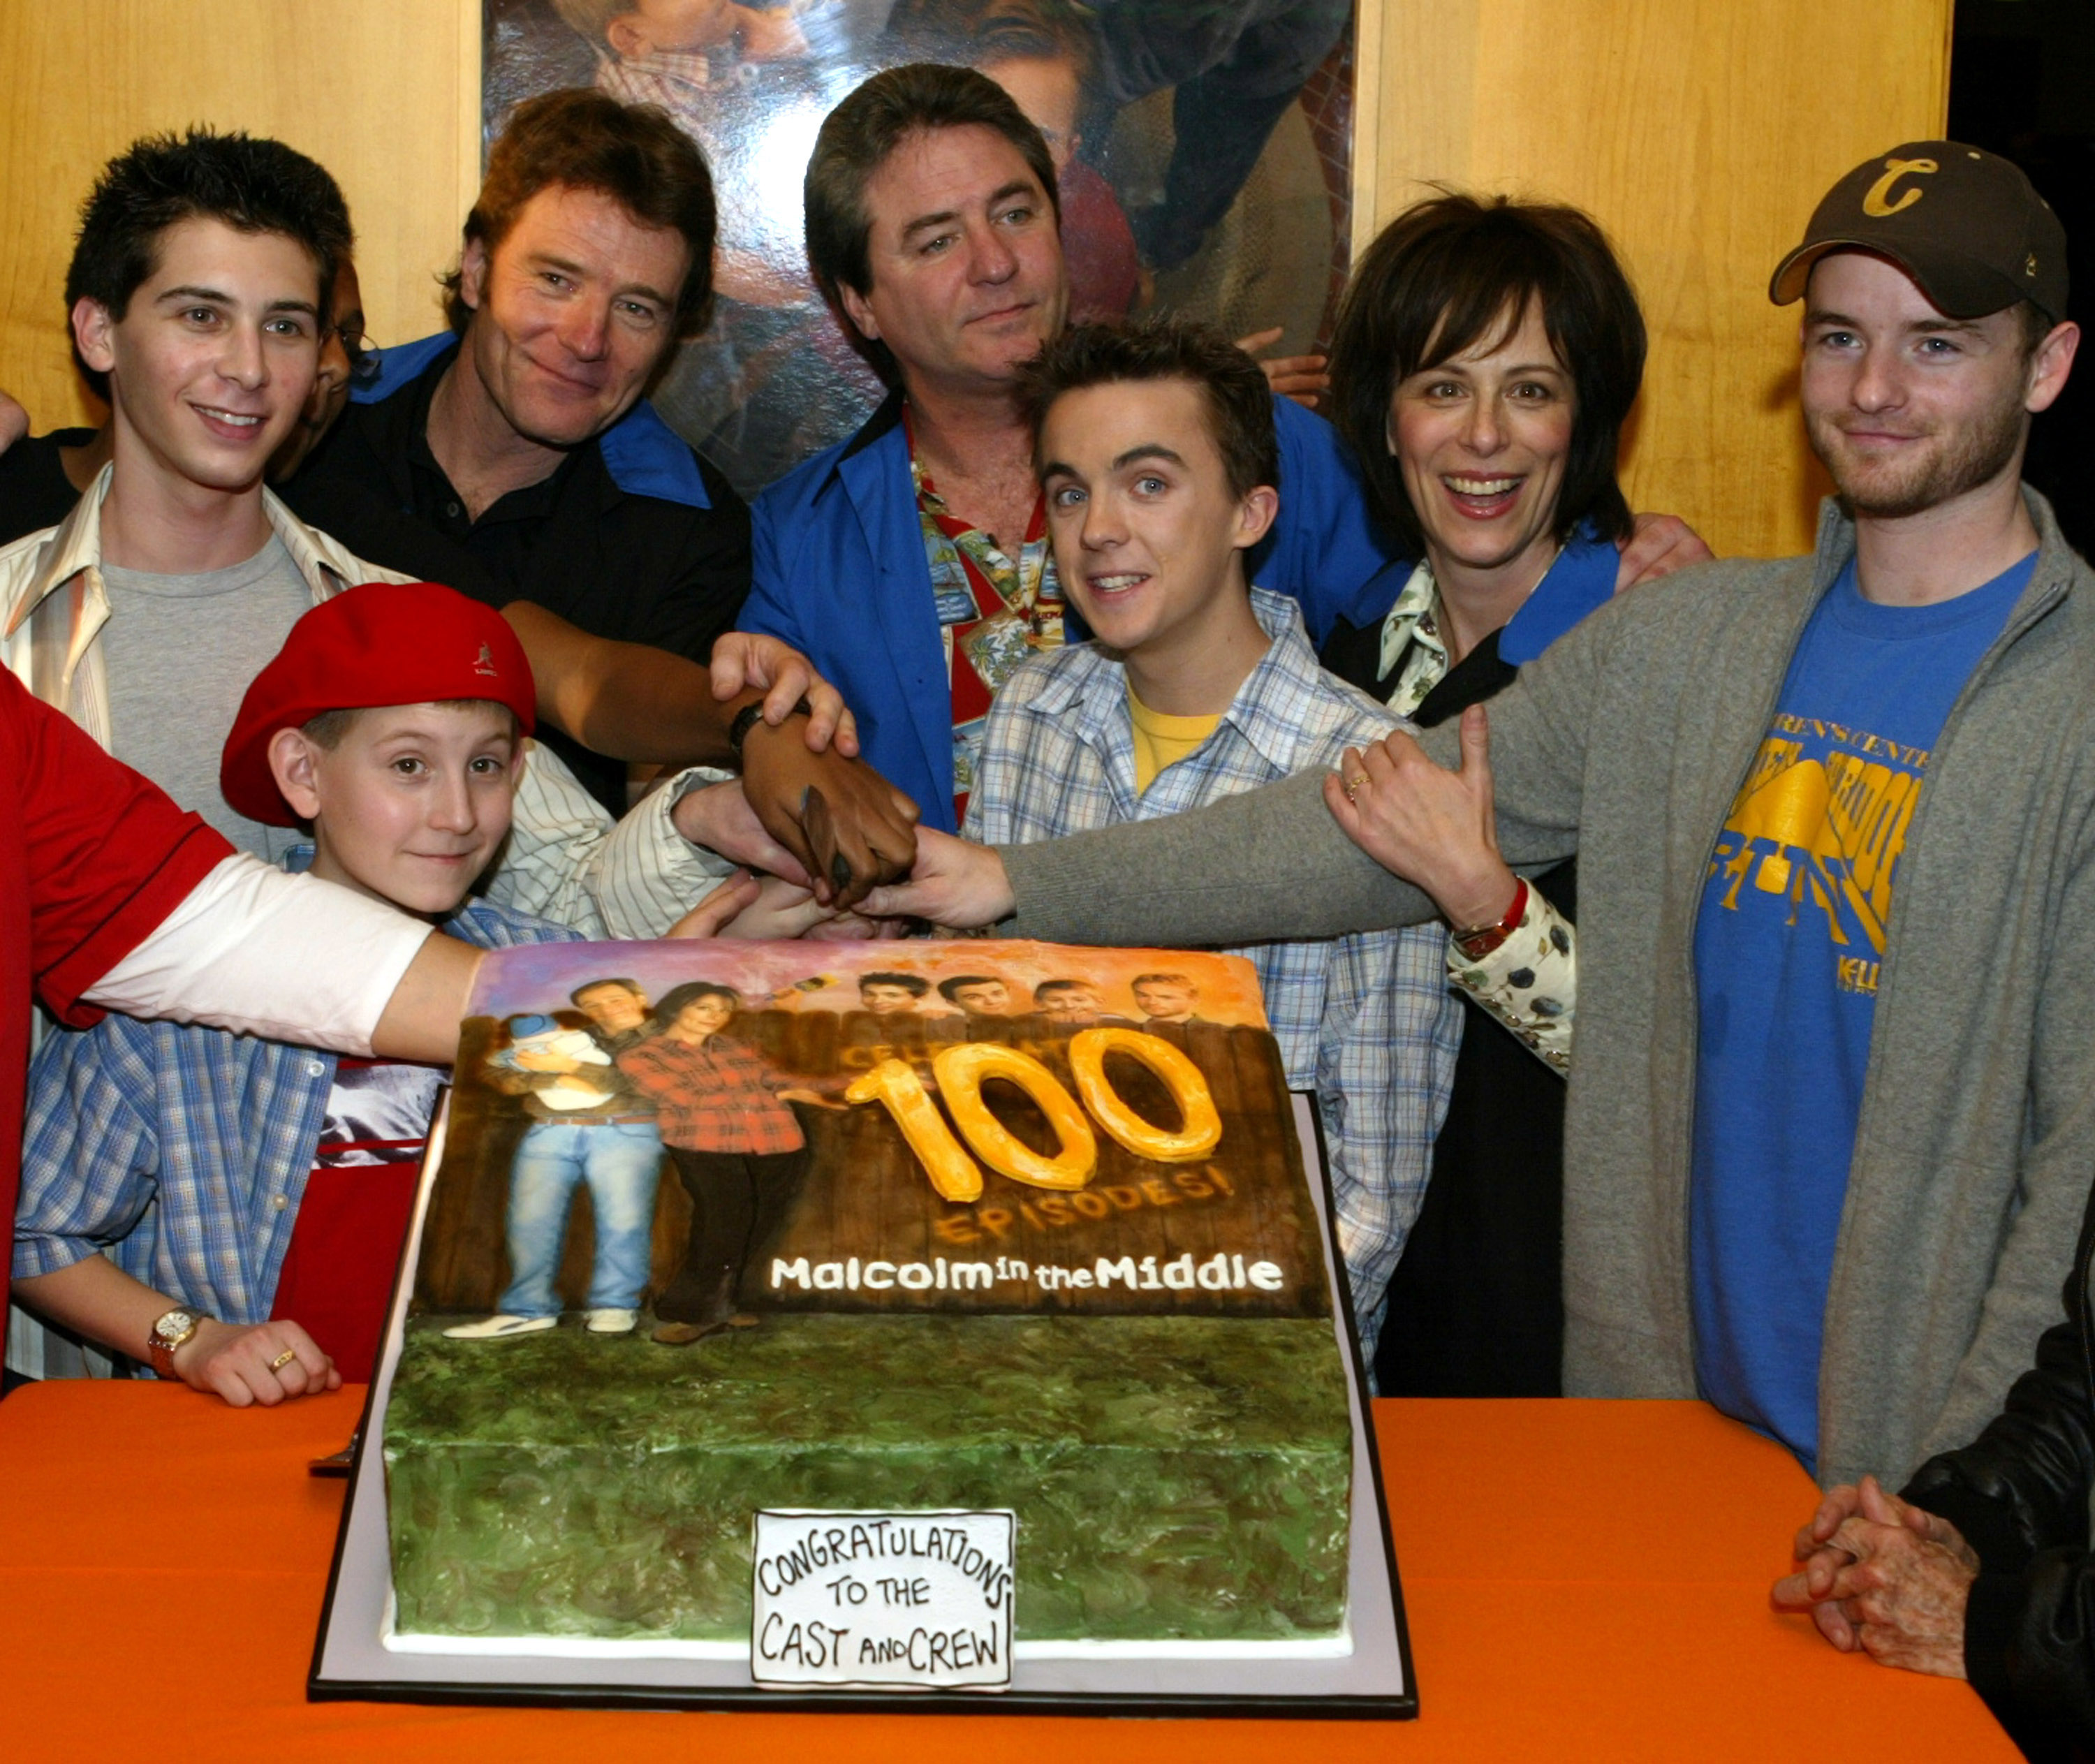 The cast of 'Malcolm in the Middle' pose with a cake celebrating the show's 100th episode